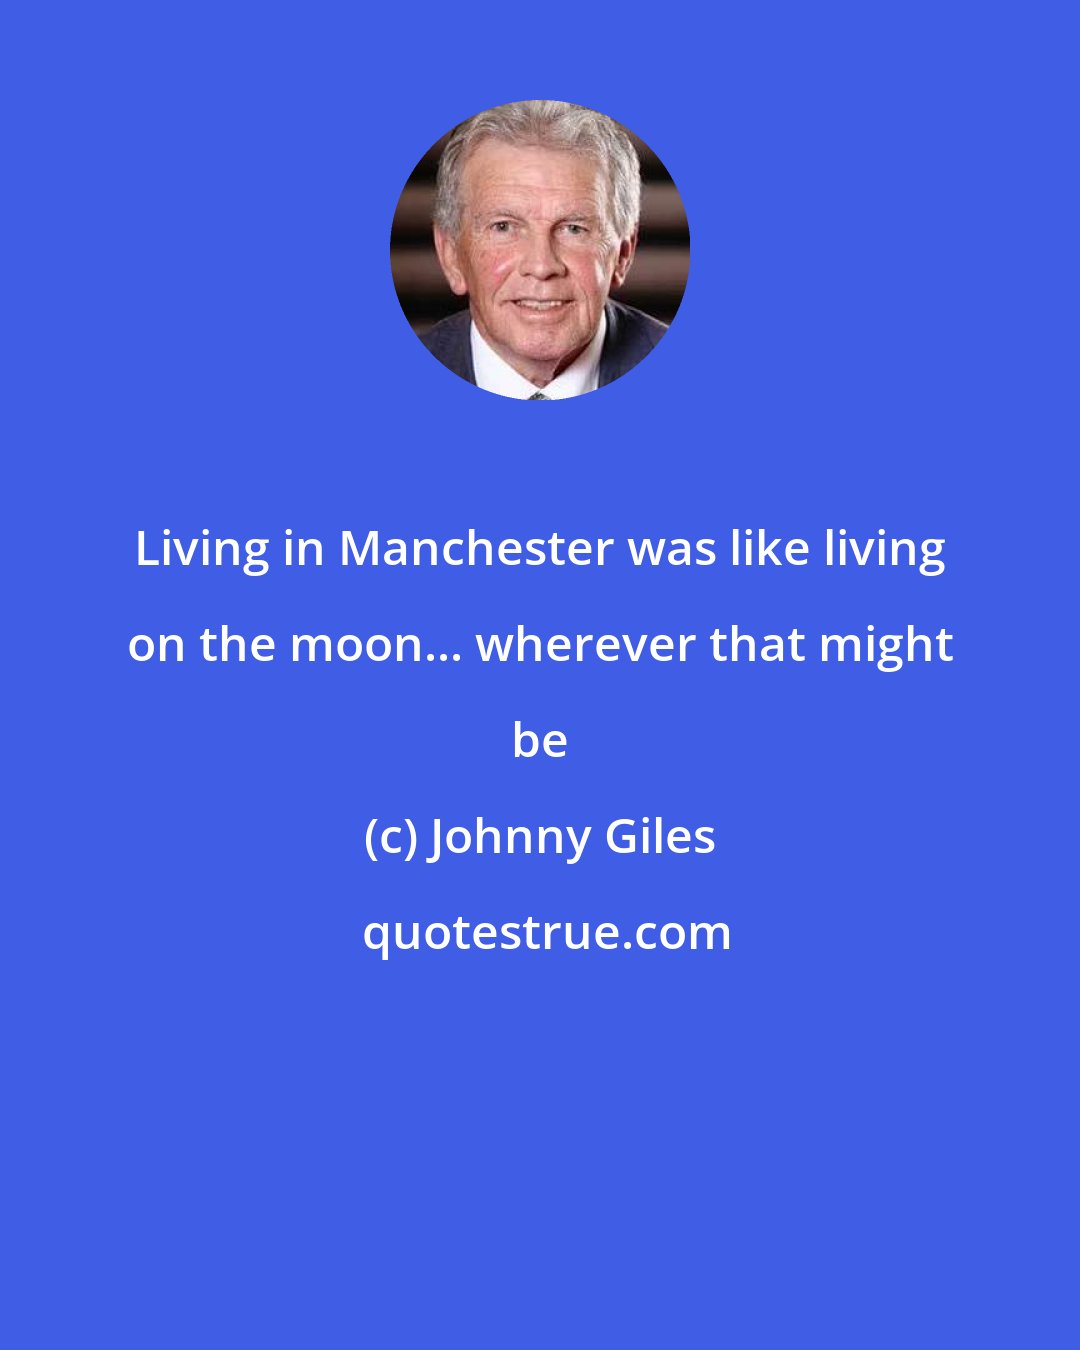 Johnny Giles: Living in Manchester was like living on the moon... wherever that might be